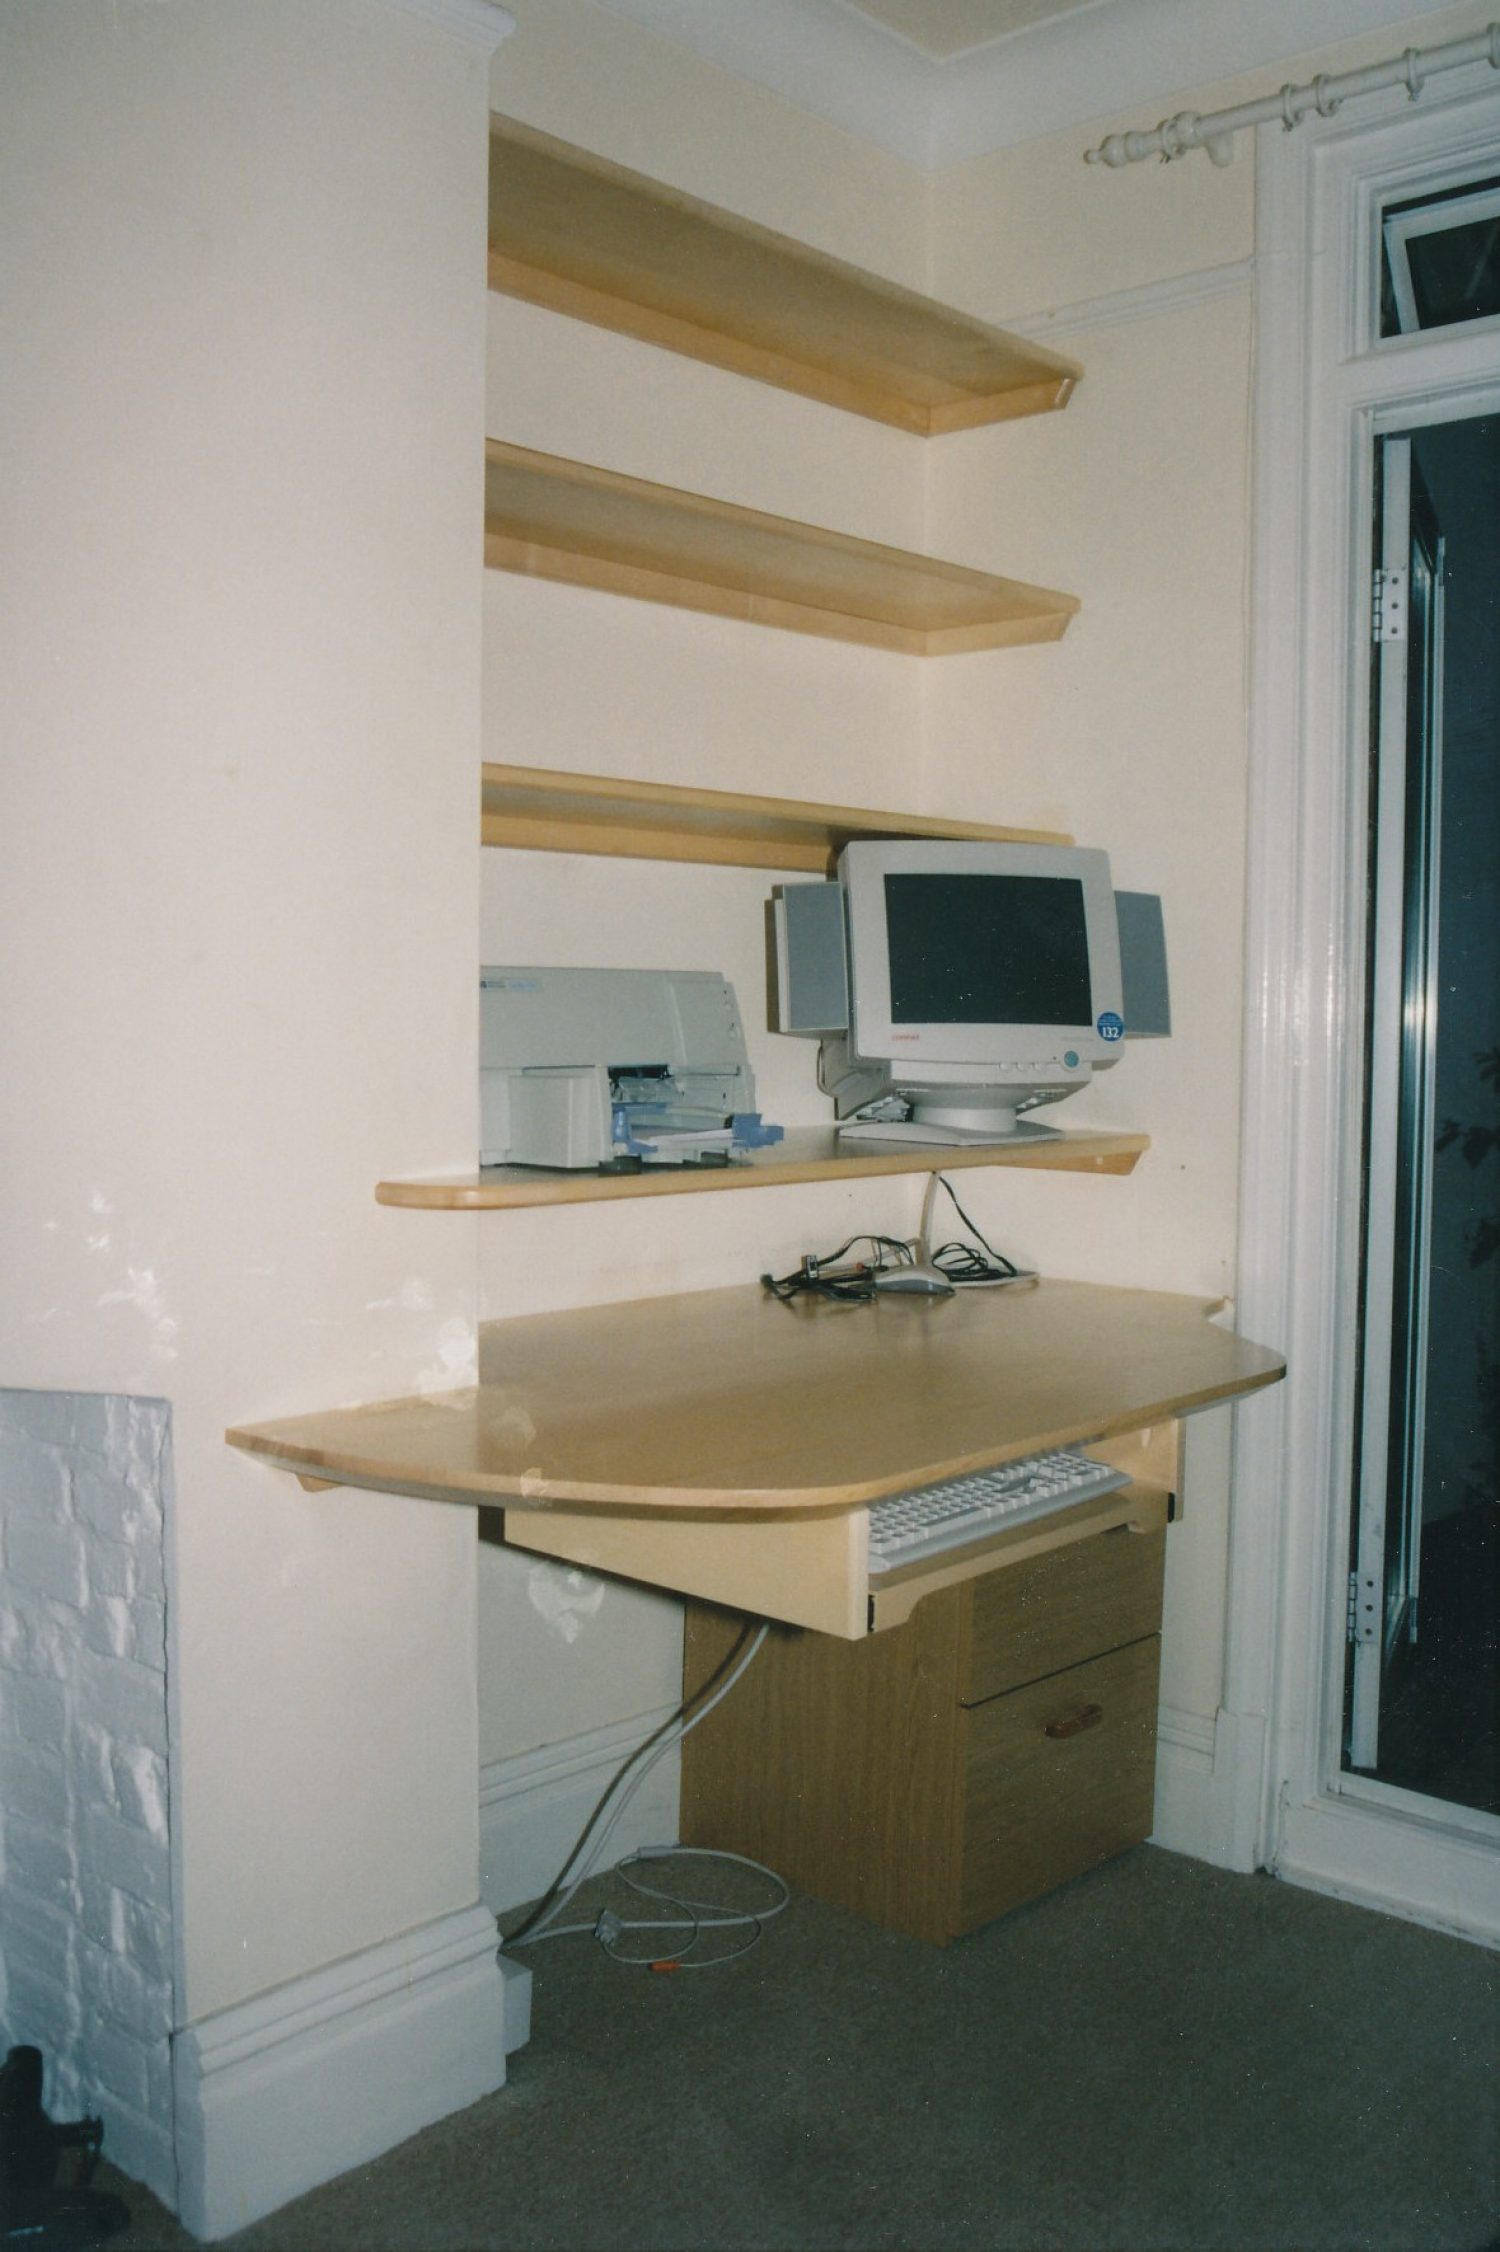 Work Station Built into Alcove